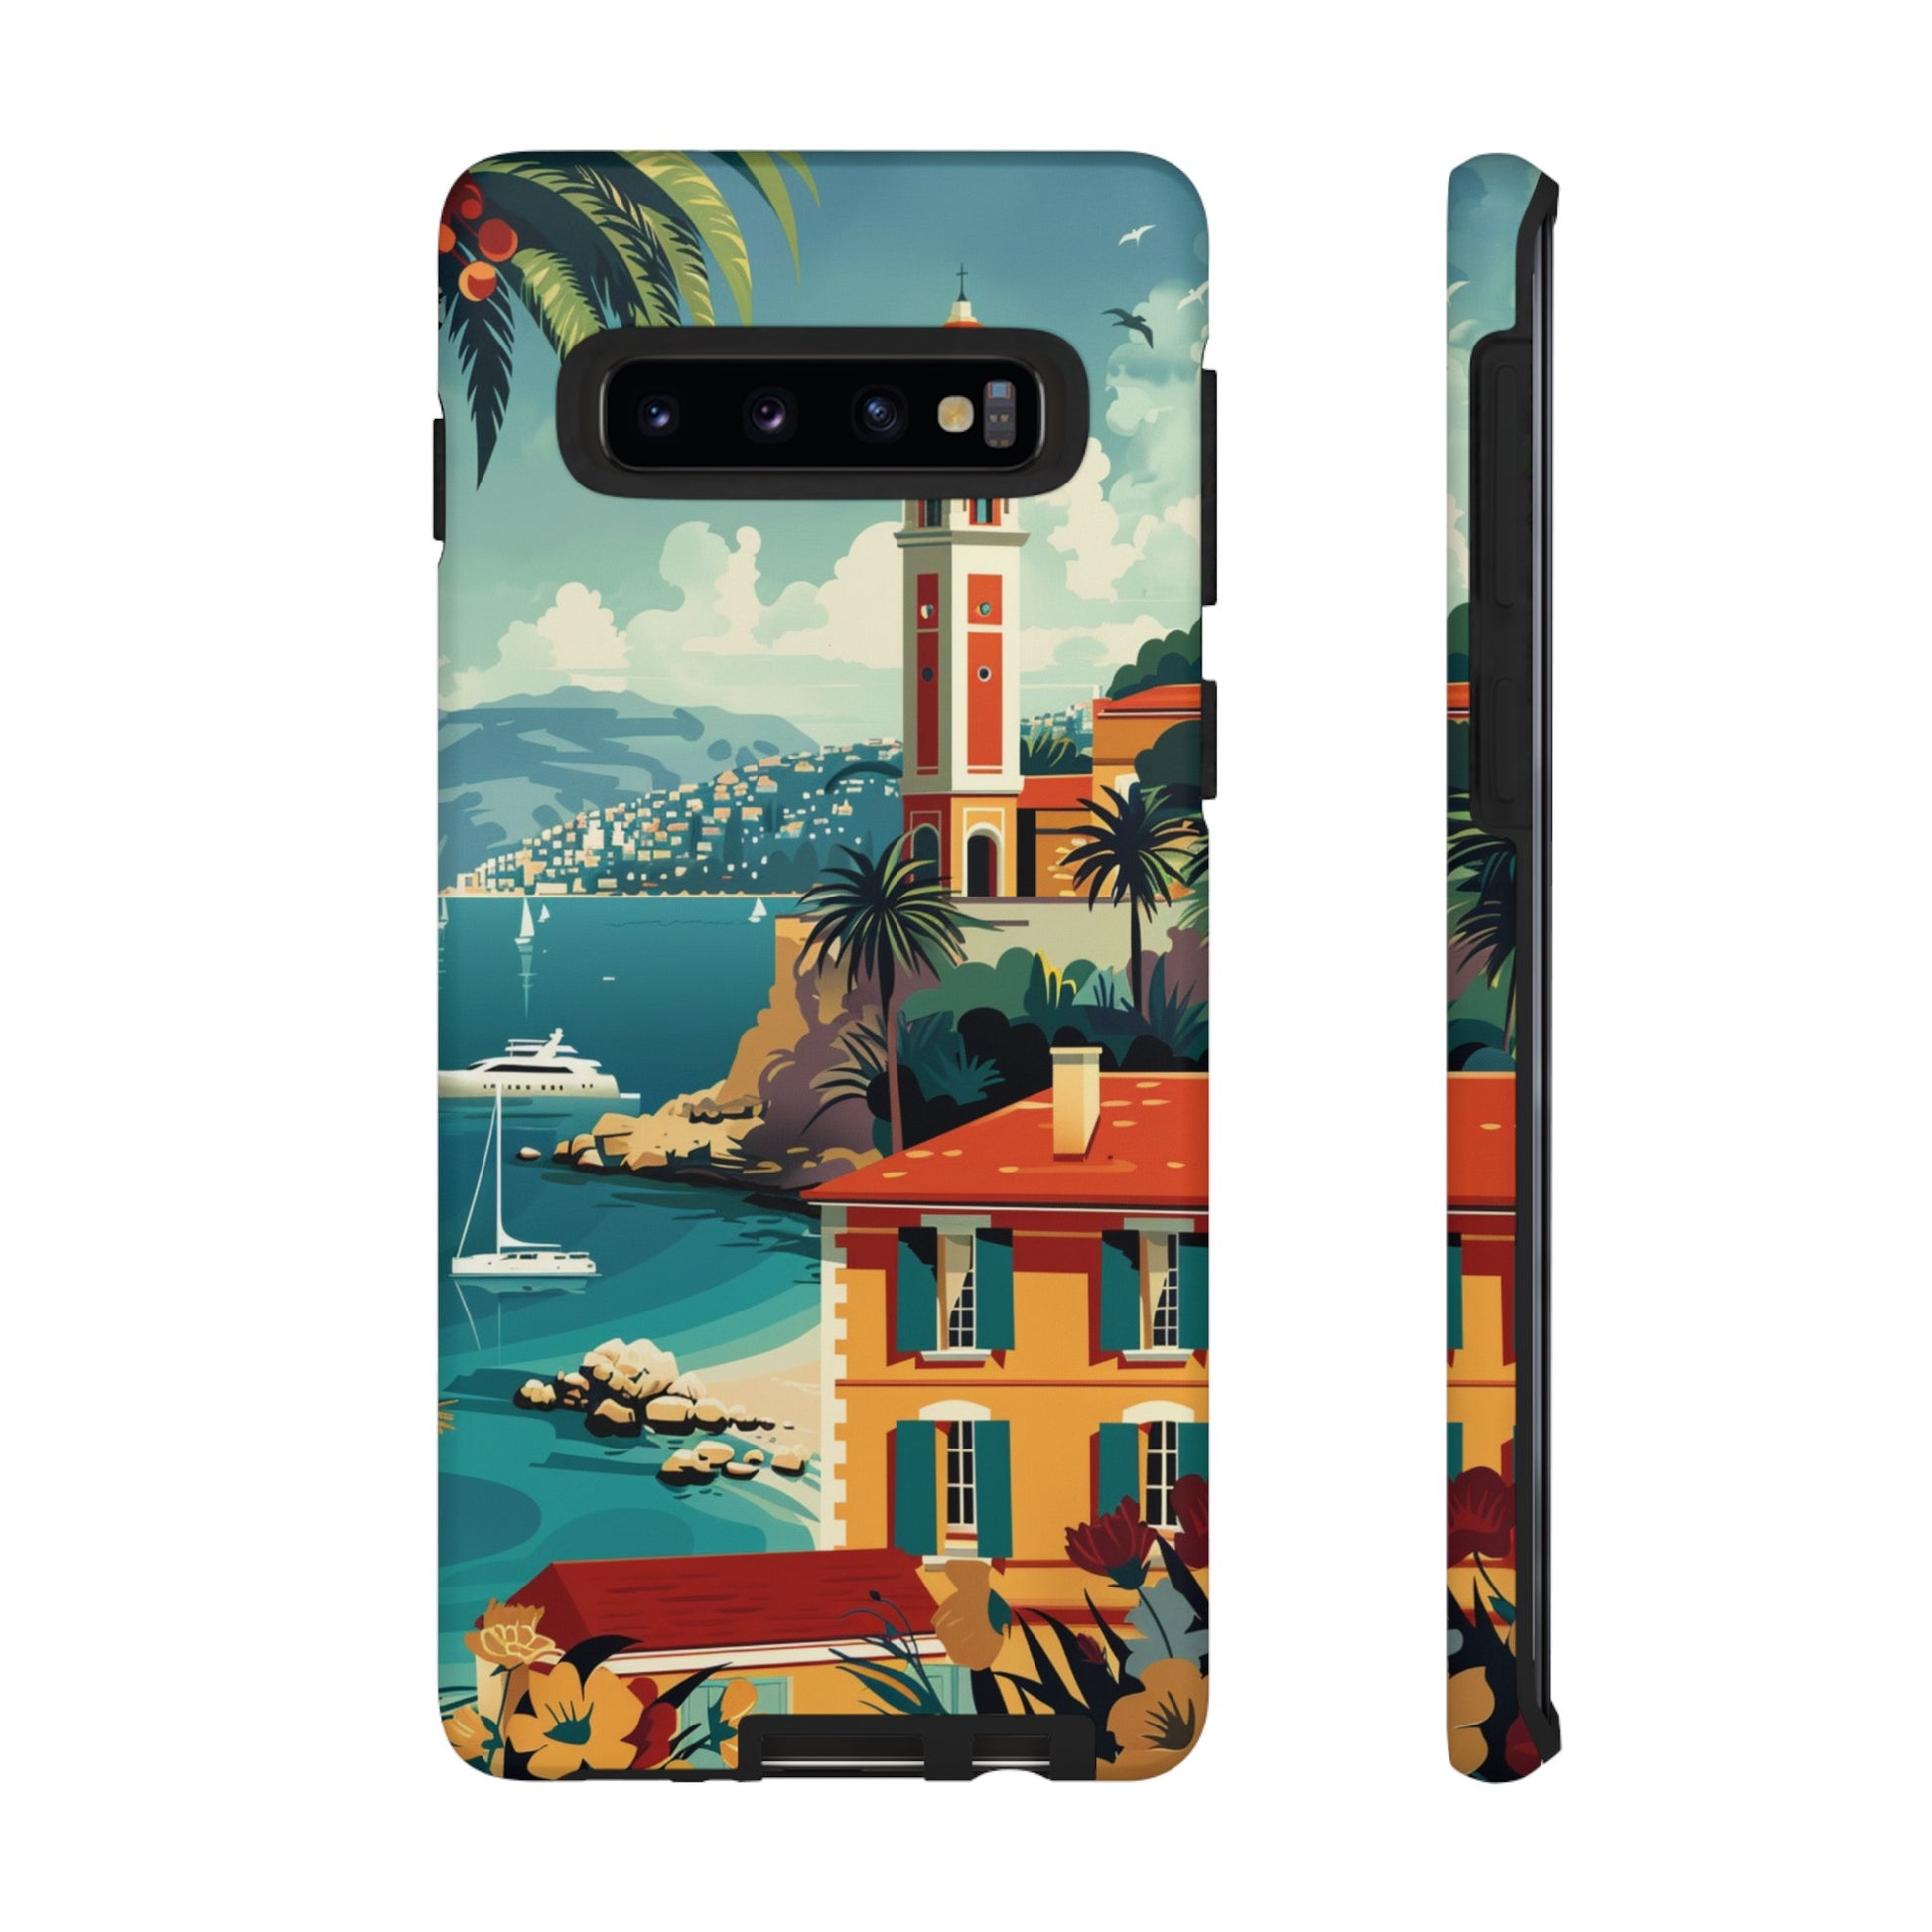 French Riviera phone case for Google Pixel